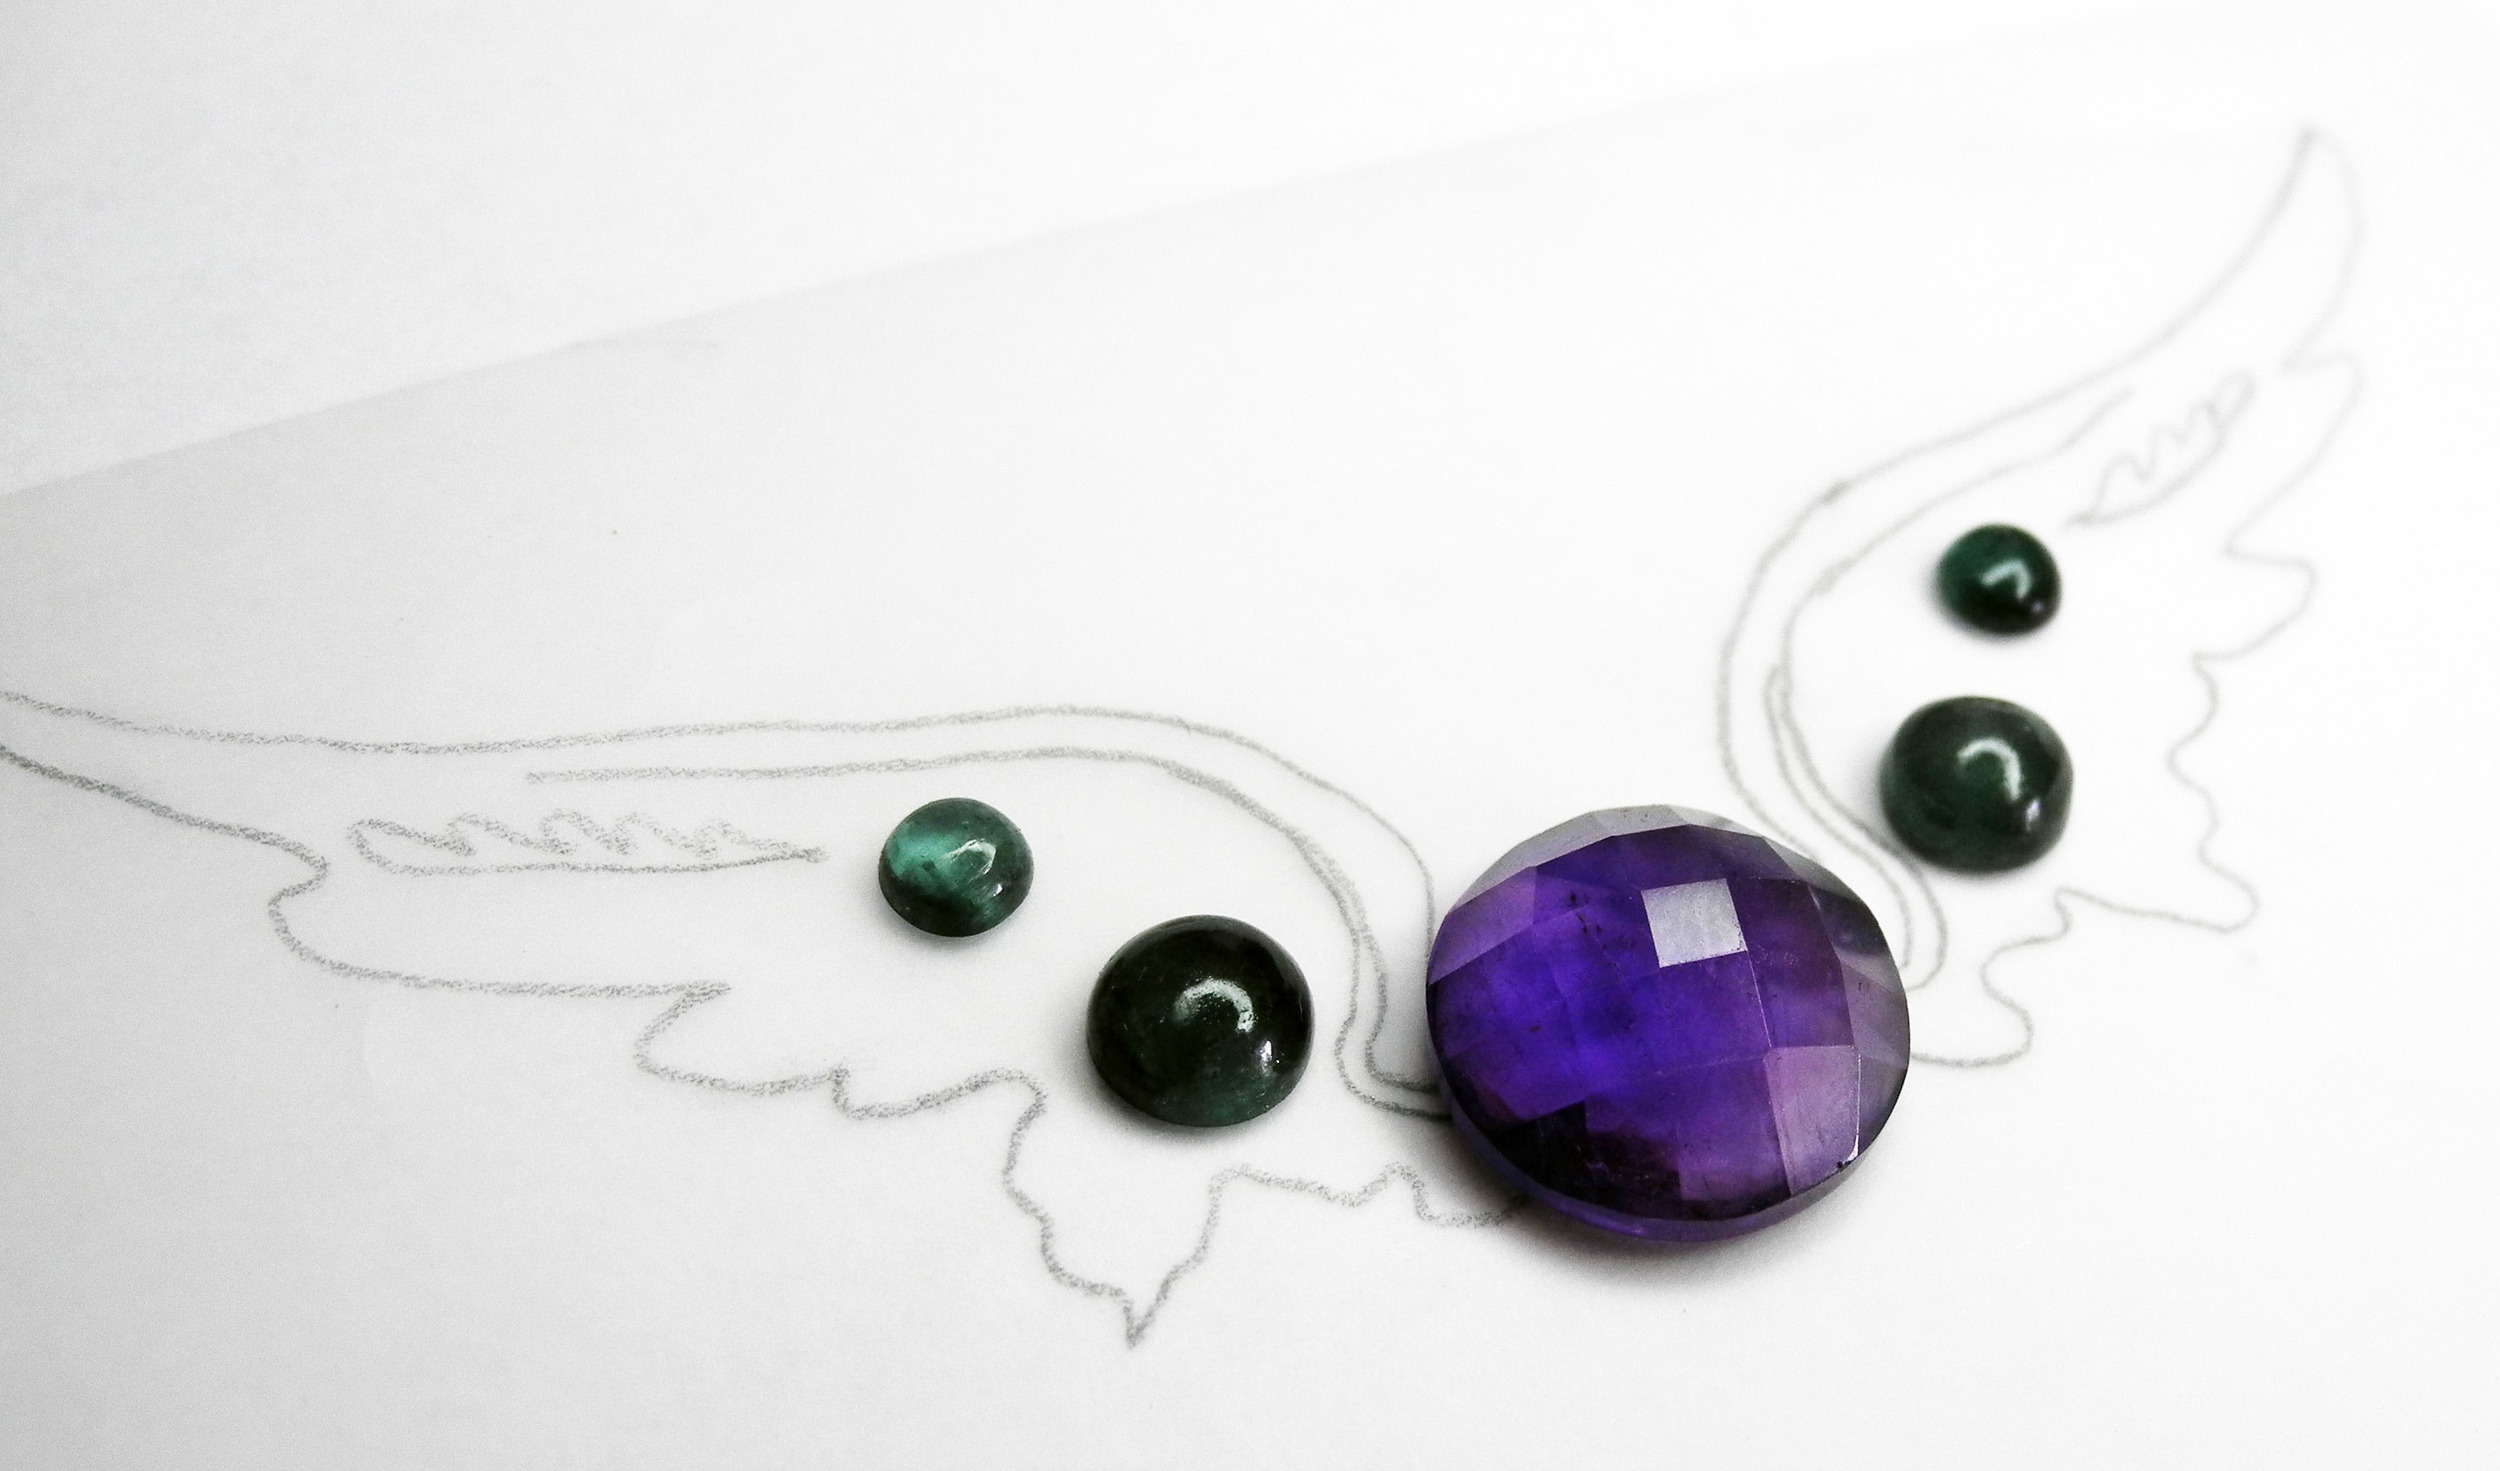 Working it out with amethyst and blue/green tourmaline